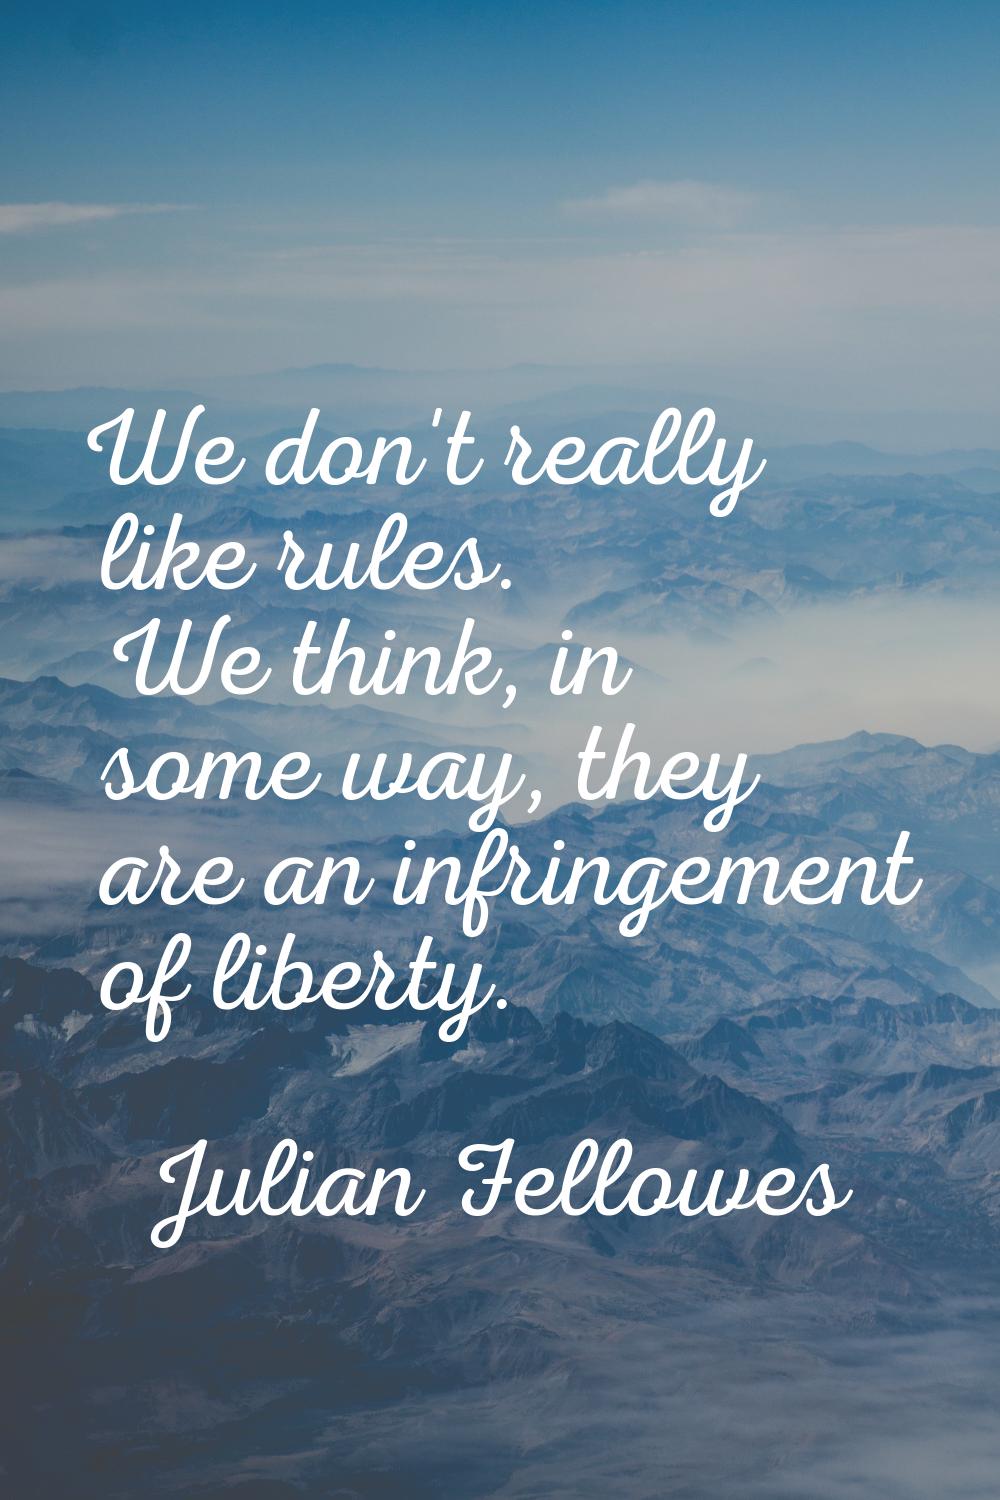 We don't really like rules. We think, in some way, they are an infringement of liberty.